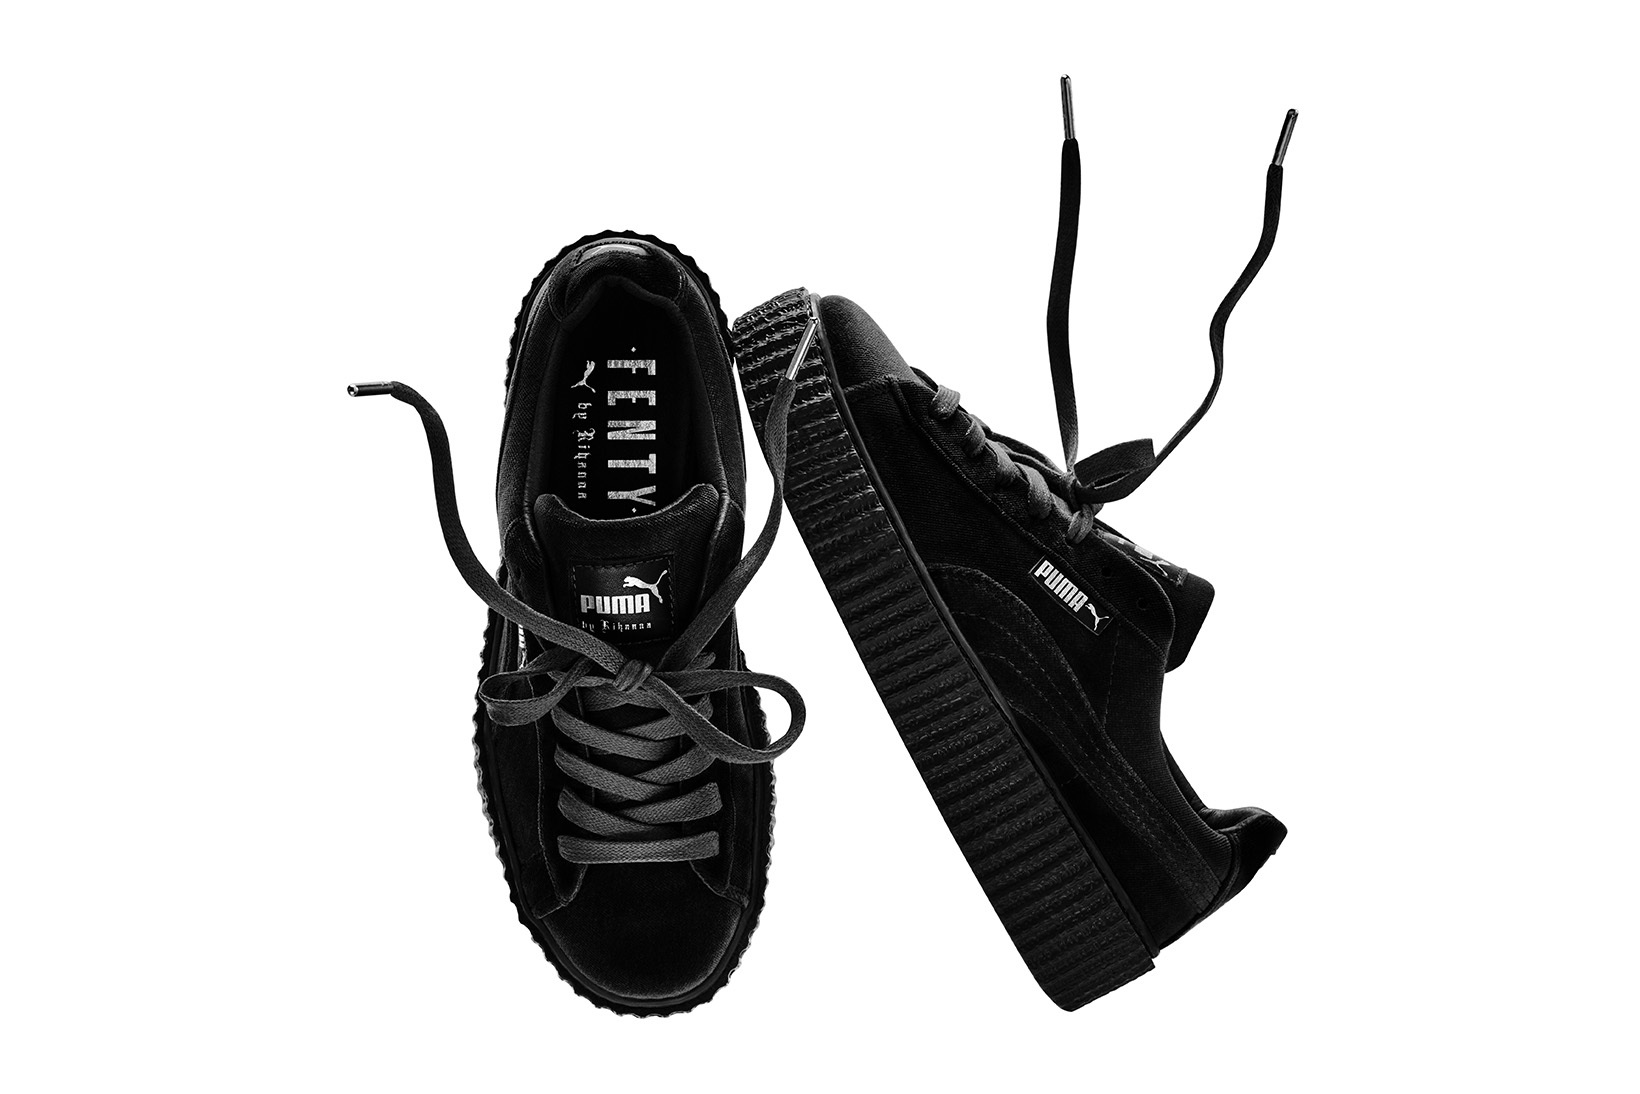 puma creepers grise velour